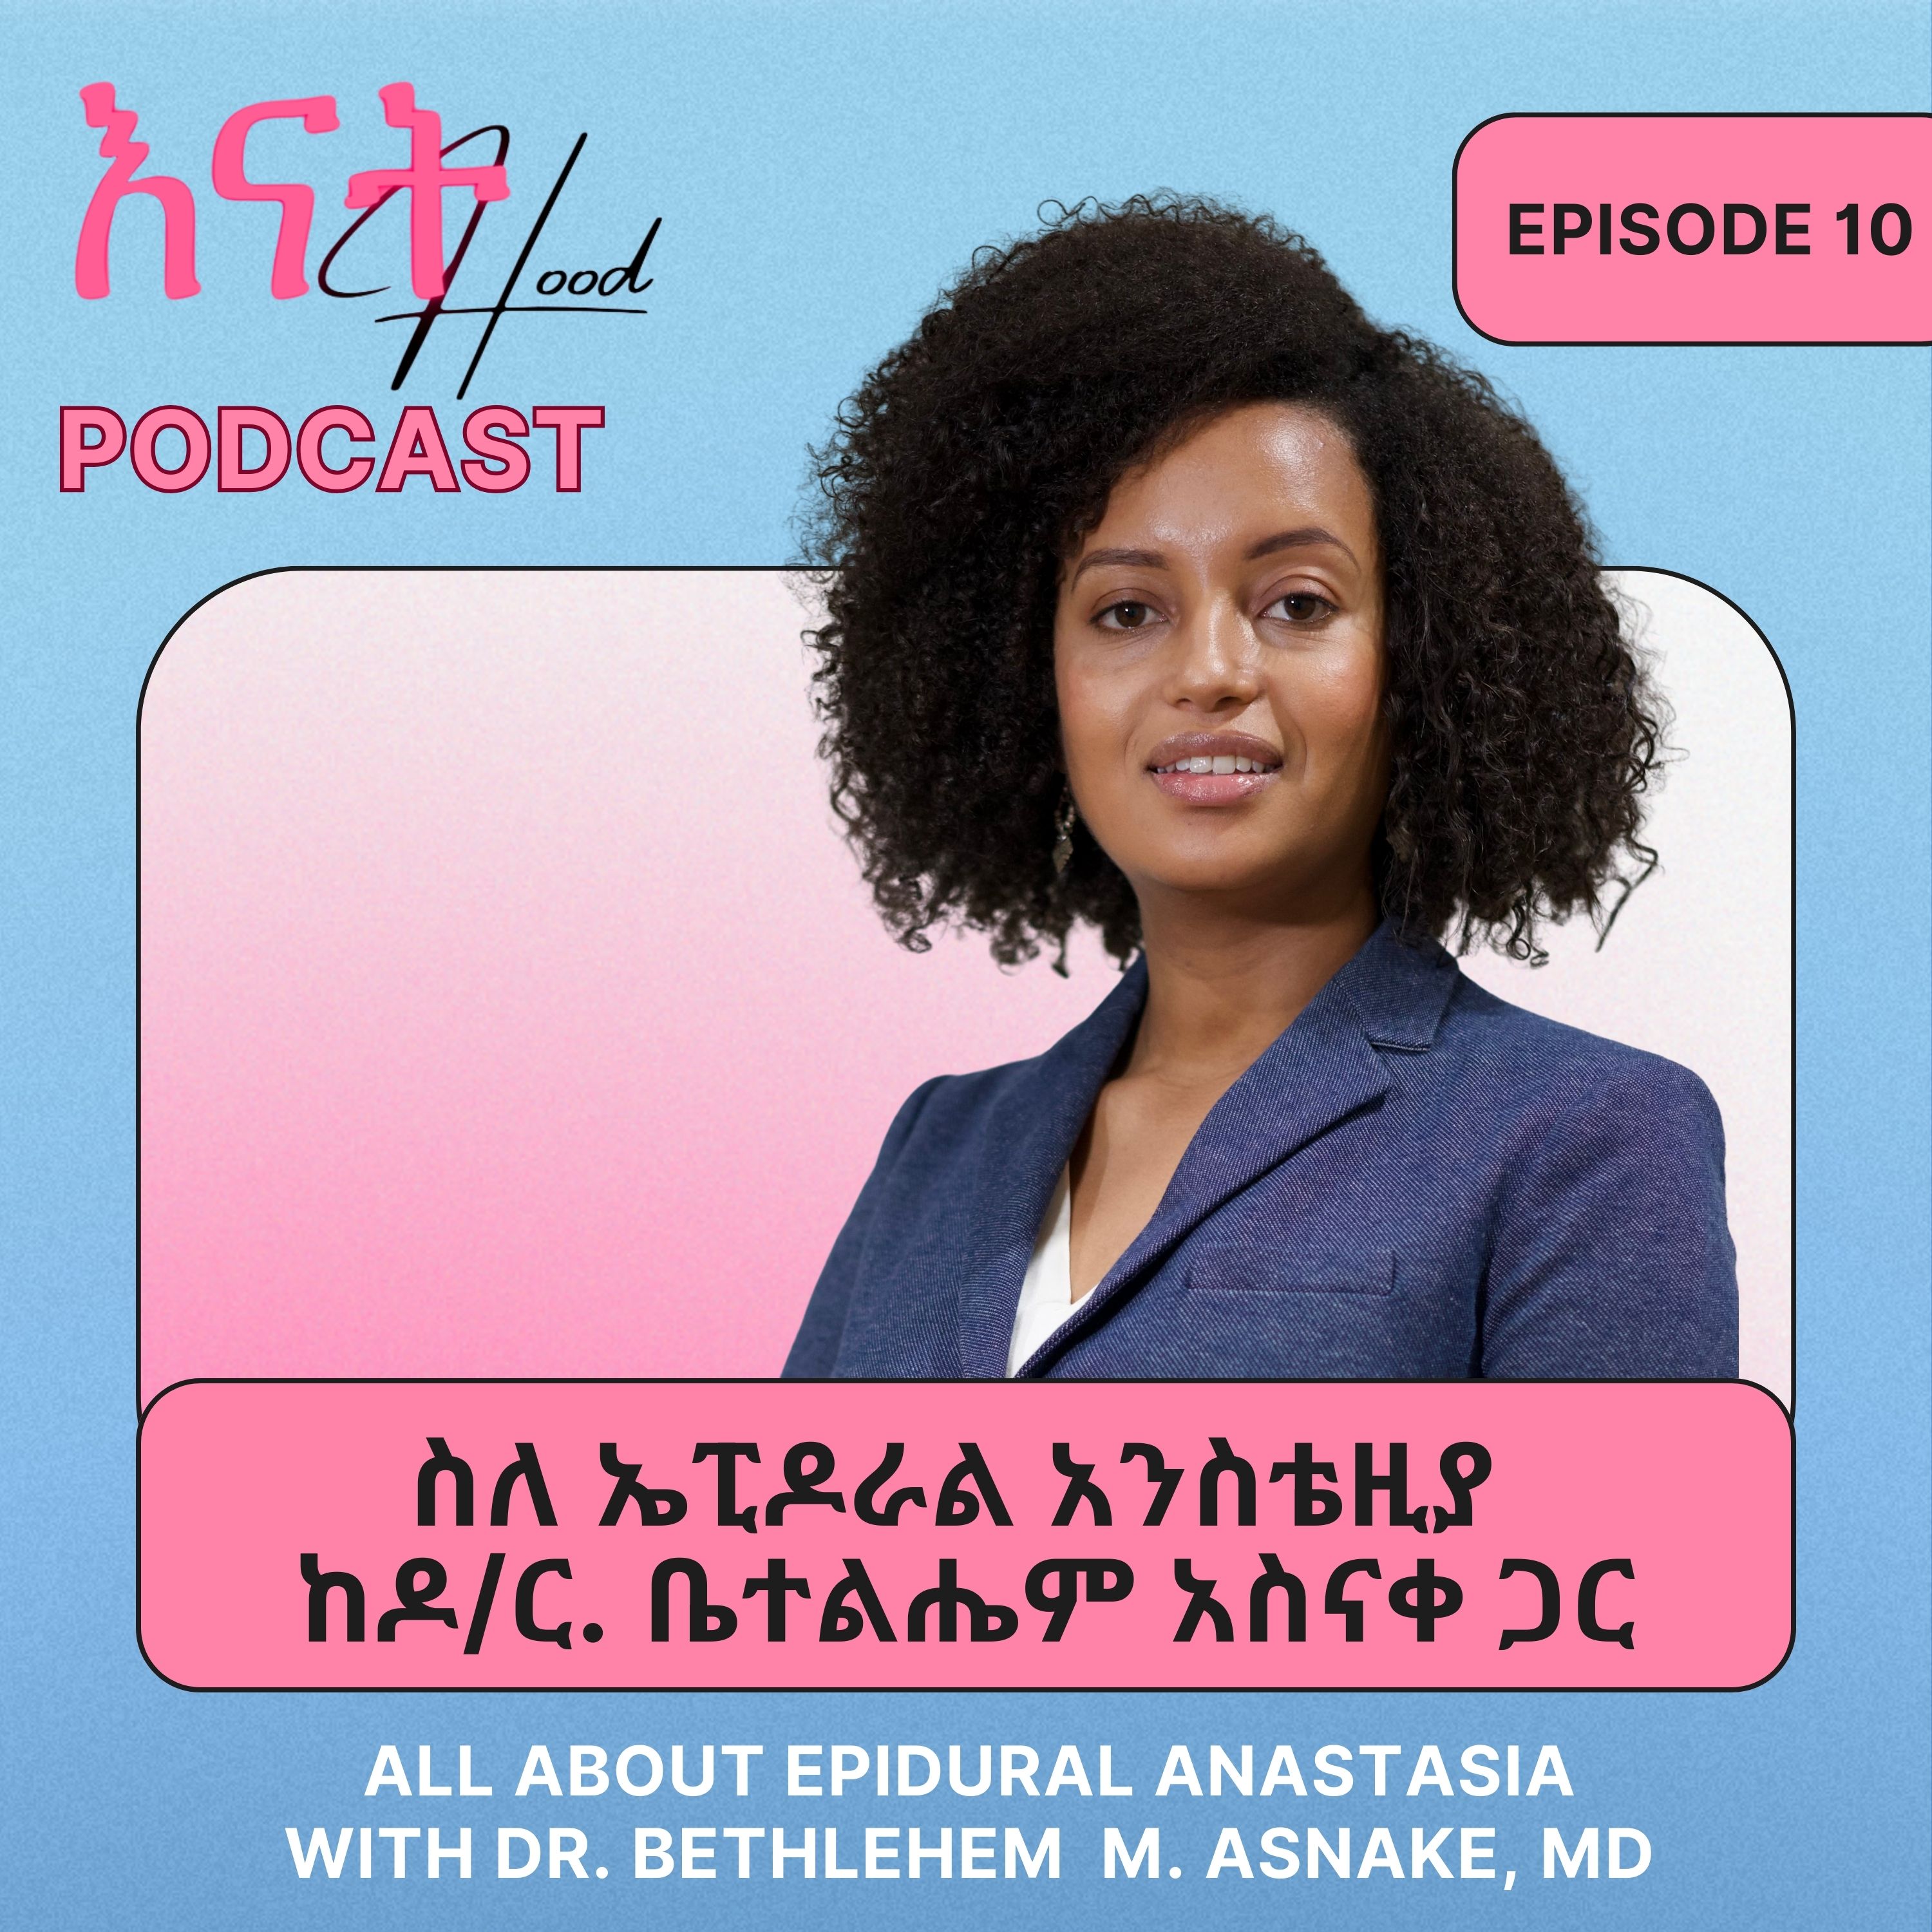 All about Epidural Anesthesia with Dr. Betelehem M. Asnake, MD - ስለ ኢፒዶራል አንስቴዚያ